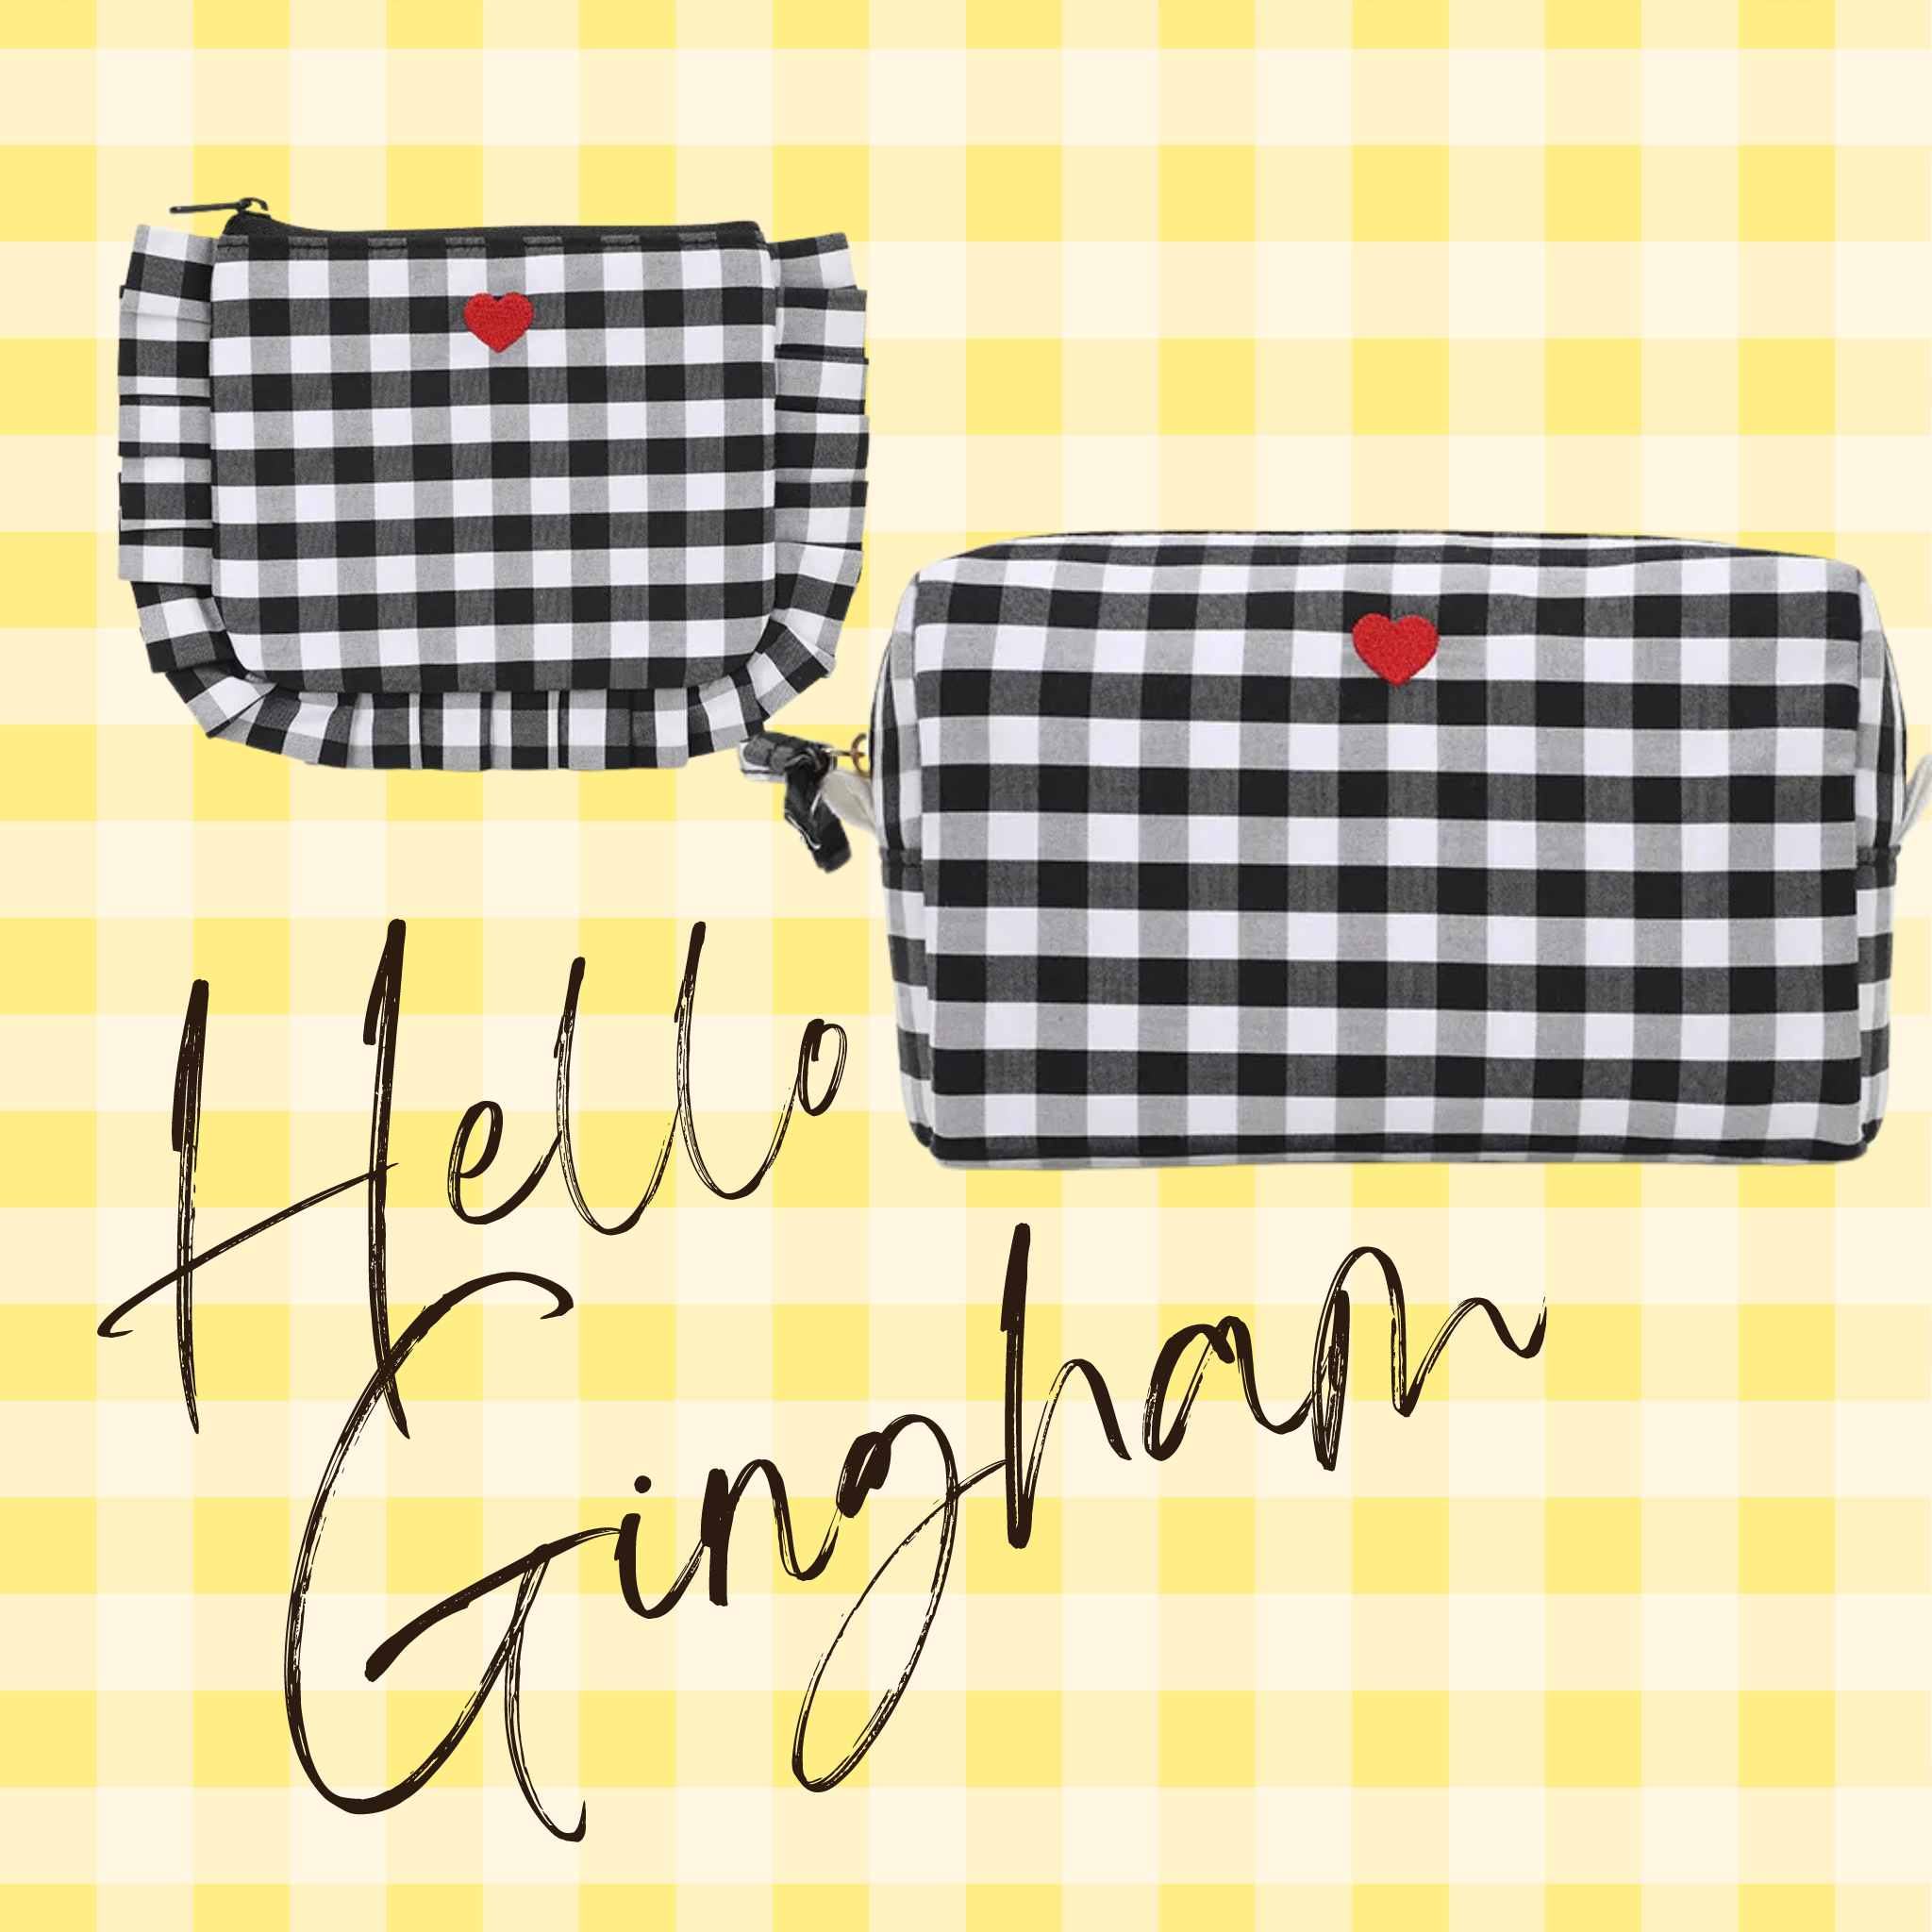 The Glorious Gingham Gift Box